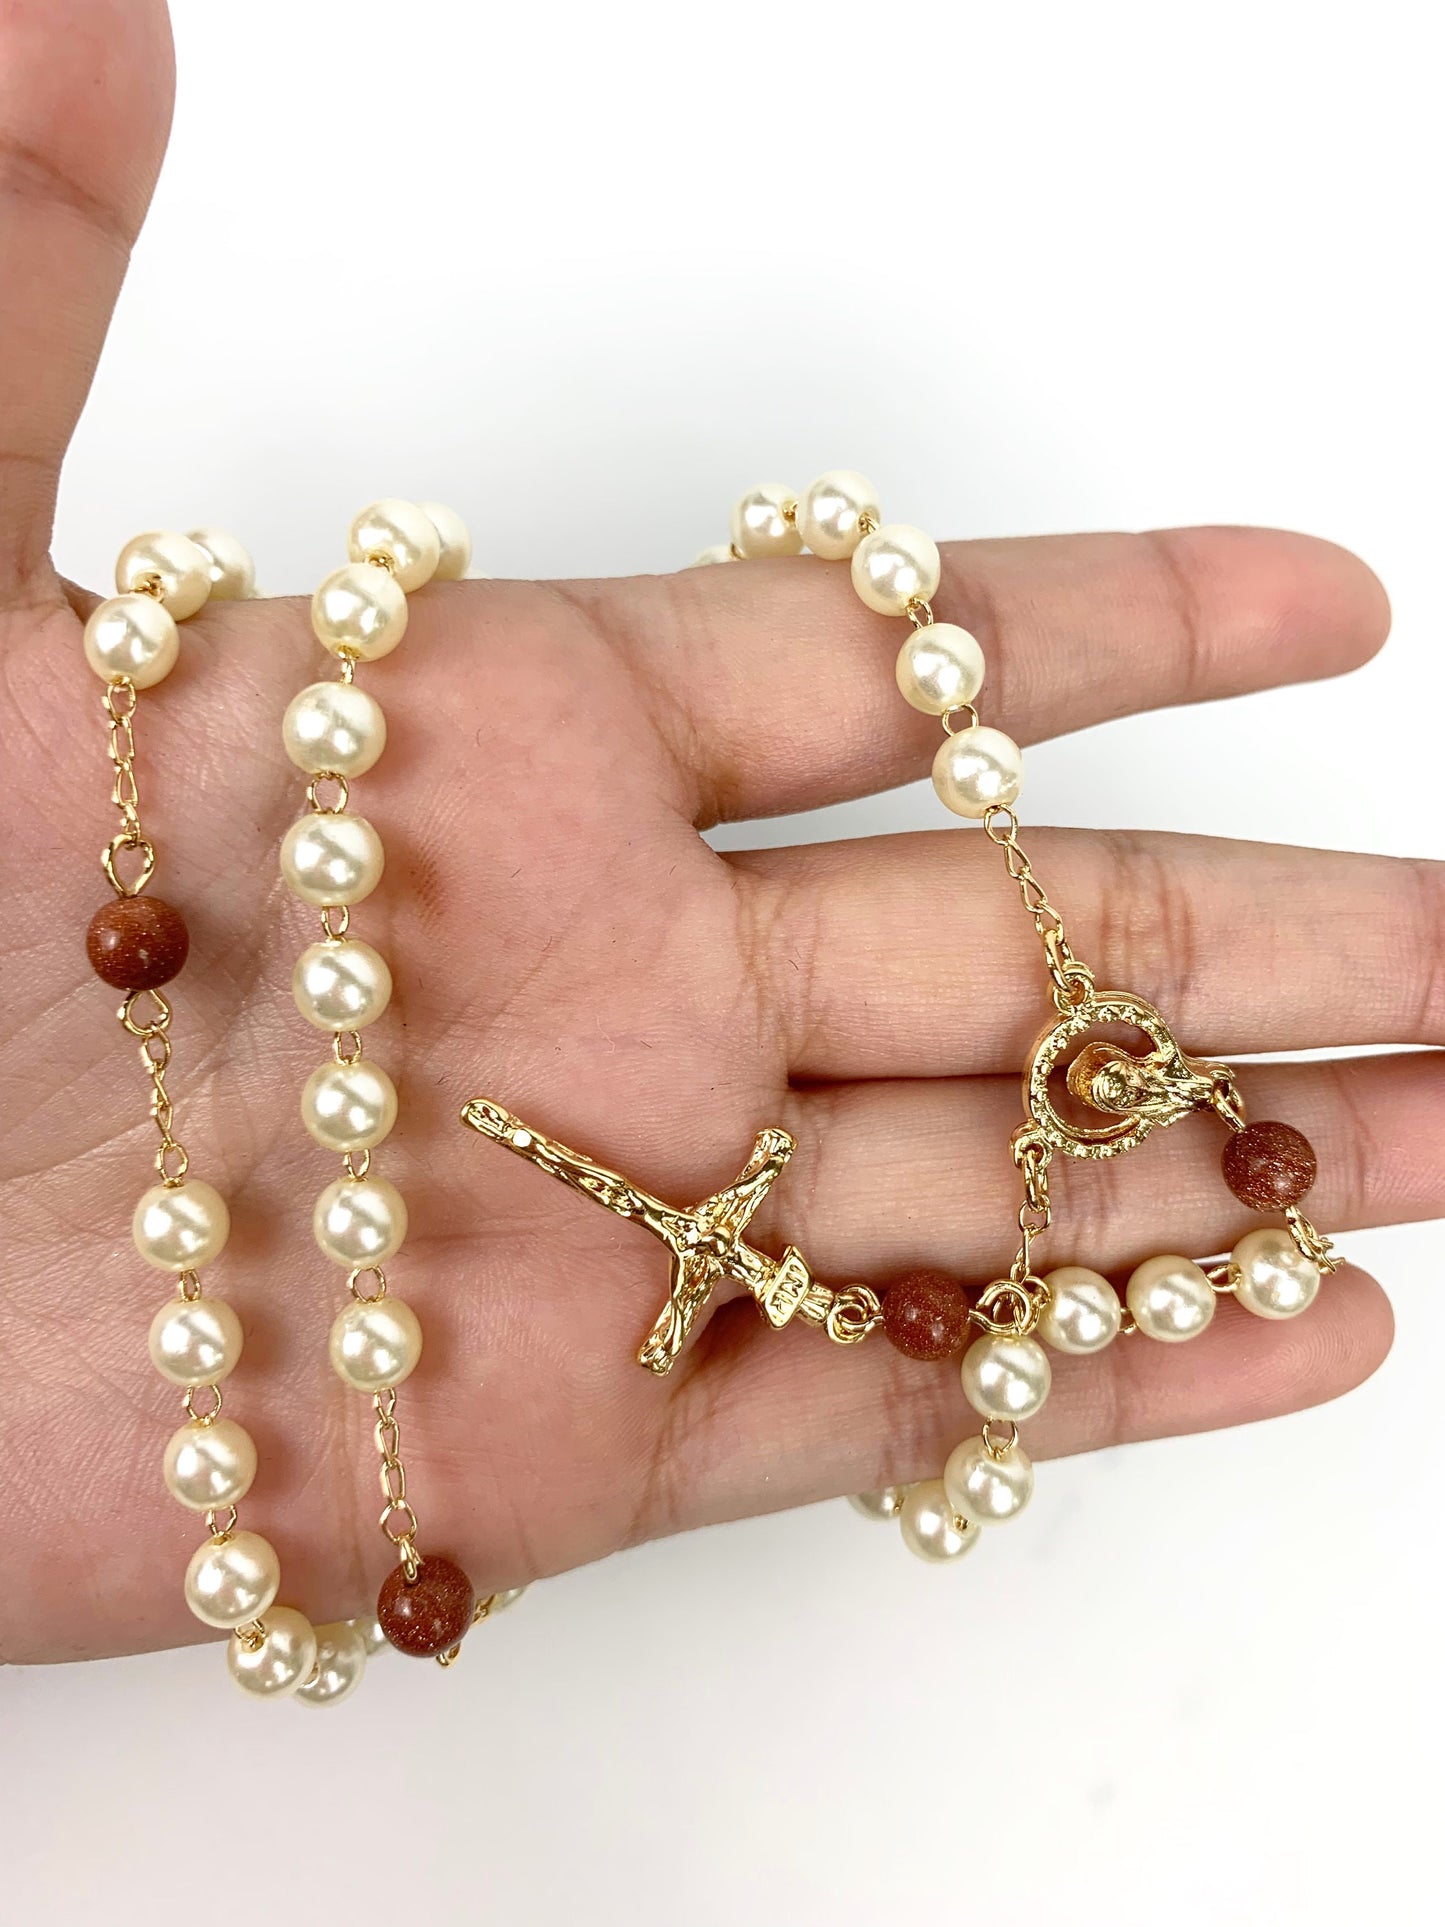 18k Gold Filled Fancy White Beaded & Venturina Rosary 22" Long Wholesale Jewelry Size